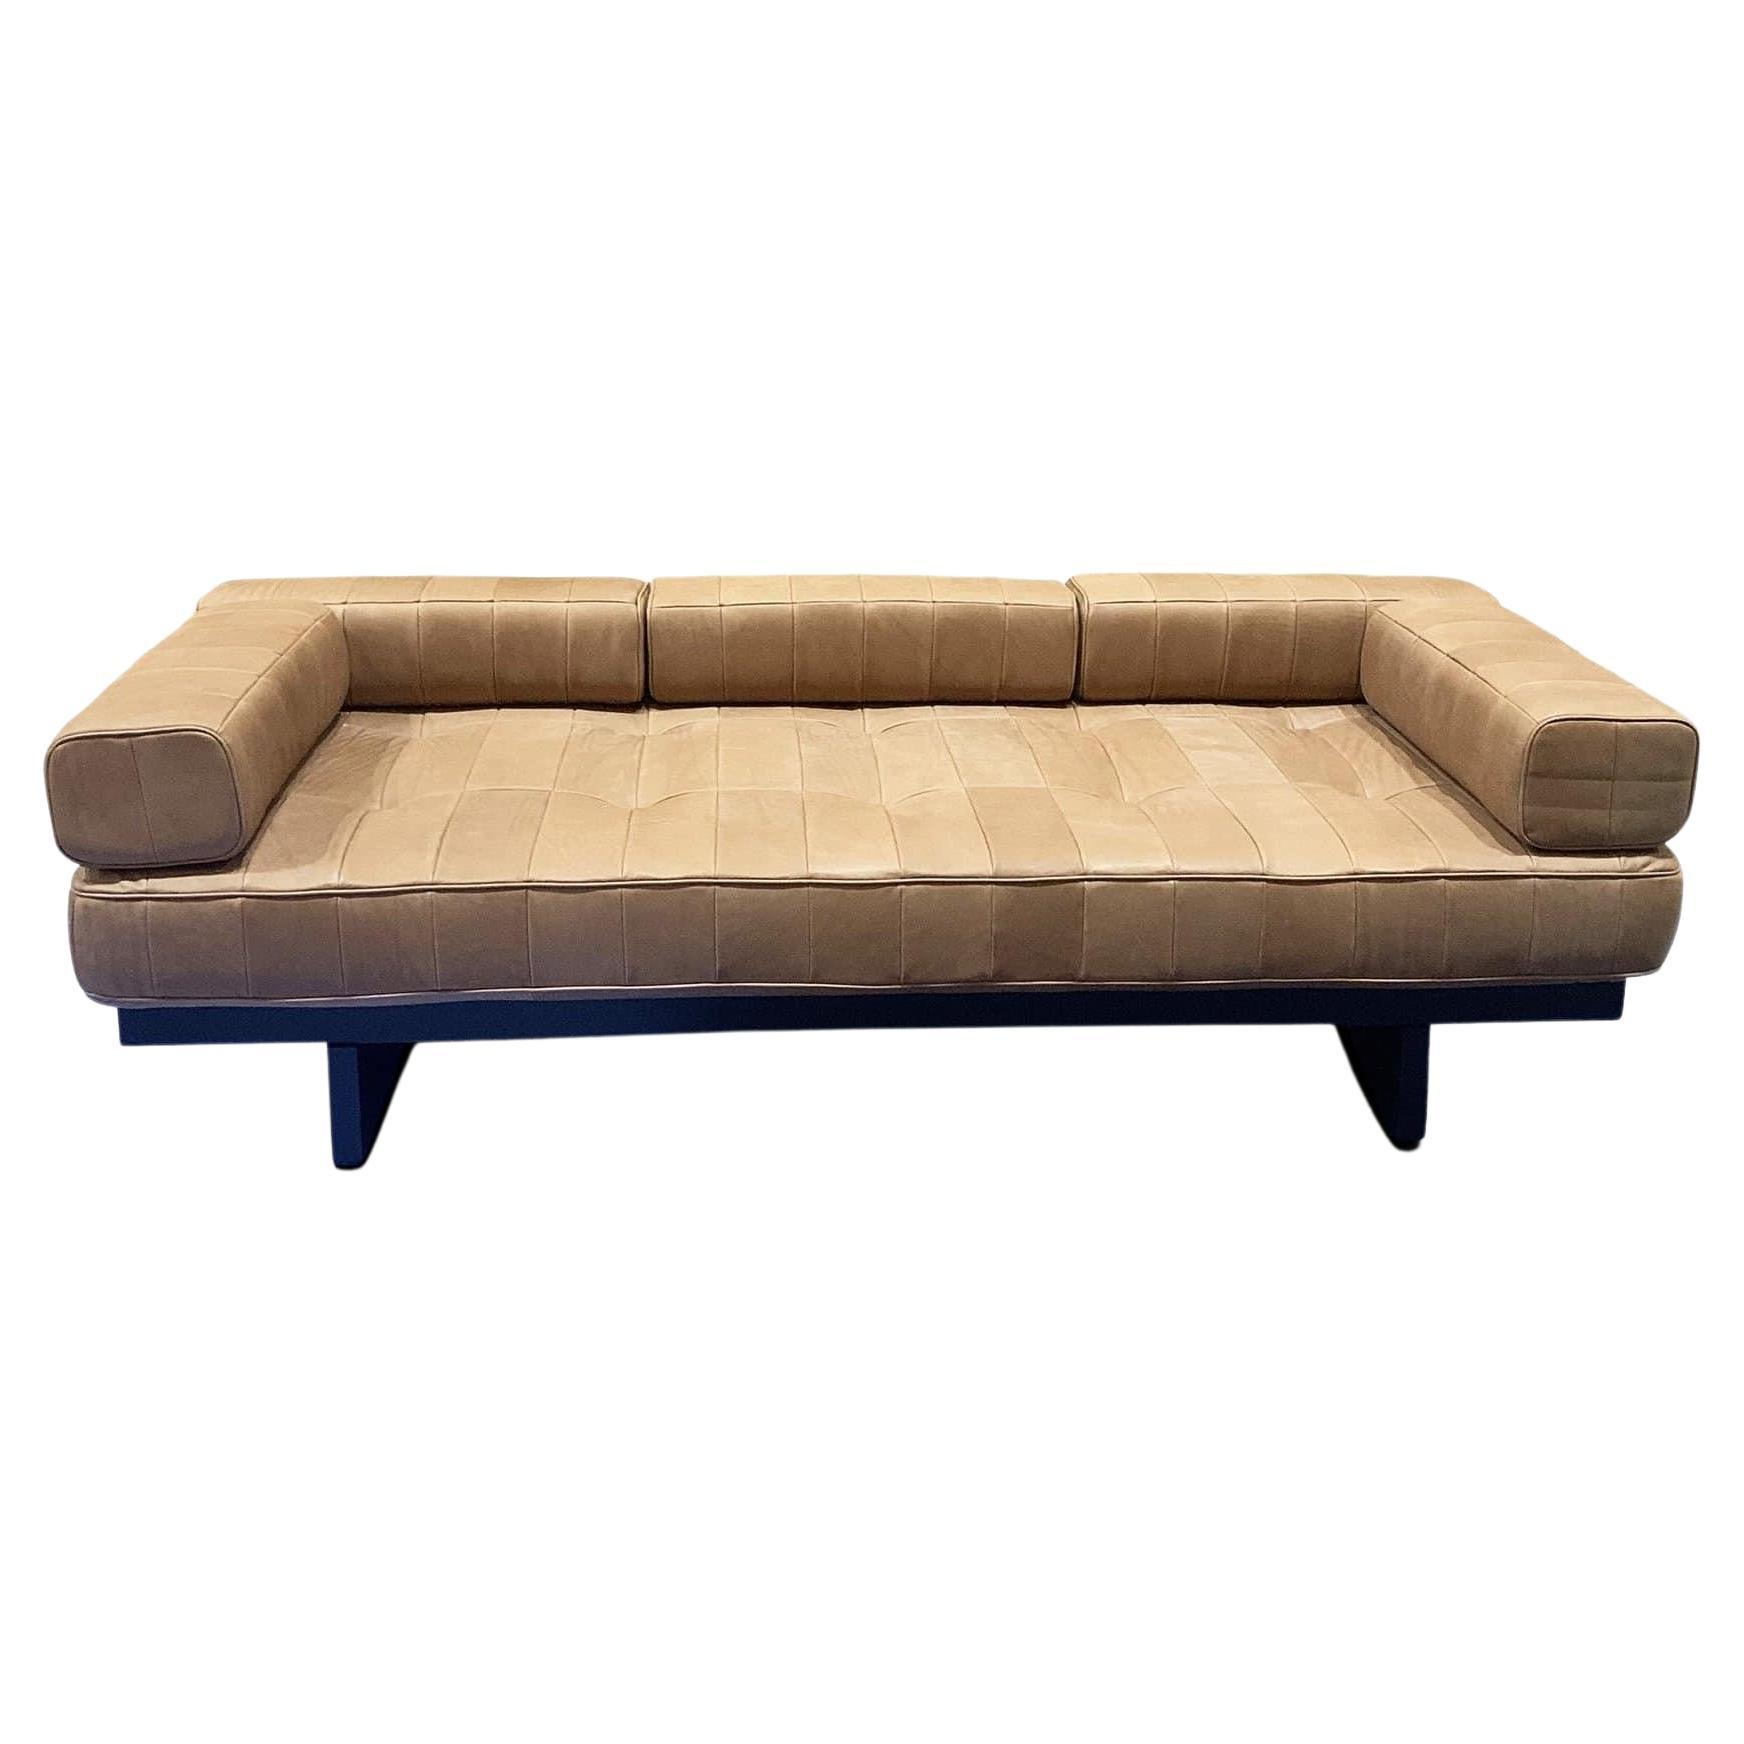 DS 80/03 Sofa with 5 Cushions by De Sede For Sale